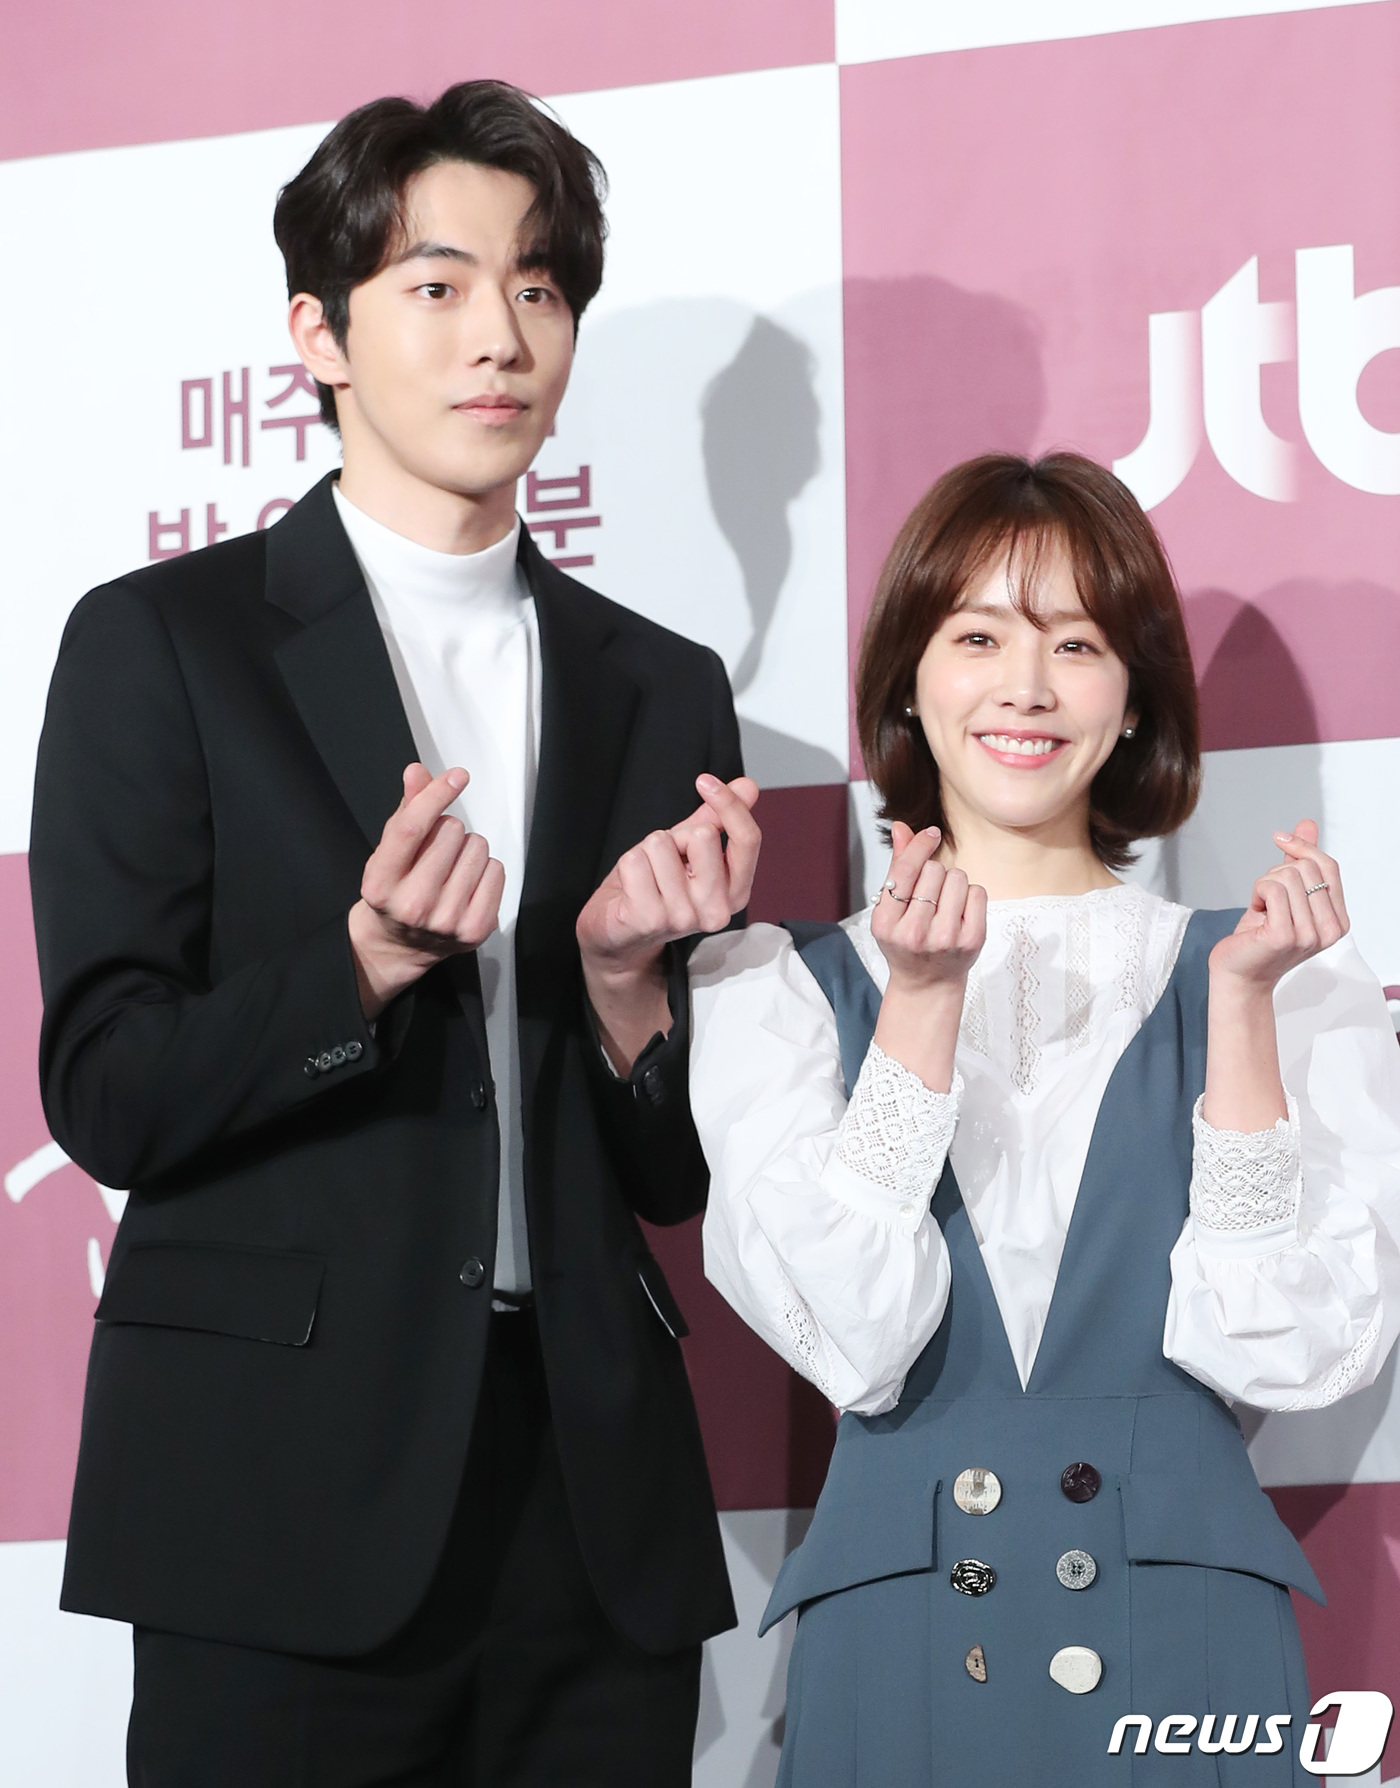 Seoul=) = Actor Han Ji-min Nam Joo-hyuk expressed his feelings that he had co-worked for three consecutive times.The 40th Blue Dragon Film Award Pre-Event Handprinting Event was held at CGV Seoul Yeouido at 2 pm on the 28th.Last year, best actress Winner Han Ji-min (movie Mitsubac), best supporting actress Winner Kim Hyang-gi (movie With God), best actress Winner Nam Joo-hyuk (movie Anshisung), and best actress Winner Kim Da-mi (movie Witch) attended.Han Ji-min and Nam Joo-hyuk will appear in the drama Bush the Eyes followed by Drama HERE and the movie Leonardo Jardim.Han Ji-min said, When I appeared as a partner and a friend in Bushing the Snow, I was sorry that I was not a partner.Drama Kahaani Award Hyeja and Junha Kahaani were always heartbreaking when they thought of Junha.I had energy exchanged in the field and a colleague Actor who gave a positive co-work, but it is good to be able to save the time to get awkward or familiar at the beginning. I have co-worked with Noh Hee-kyungs works, and there are a lot of other actors as well as us.Personally, it is a story of NGO group that has always been interested, and there is expectation for Mr. Nam Joo-hyuks new appearance to be matched to the same member.My character is also looking forward to having a part to challenge, too, and Ive come together with three works, and Im getting good energy, he added.Nam Joo-hyuk also said: Its an honor for me and its so good.I have a blind eye, Leonardo Jardim, and HERE, and it seems to be a happy moment just to be able to work with good seniors. The 40th Blue Dragon Film Awards will be held on November 21st in Paradise City, Incheon.